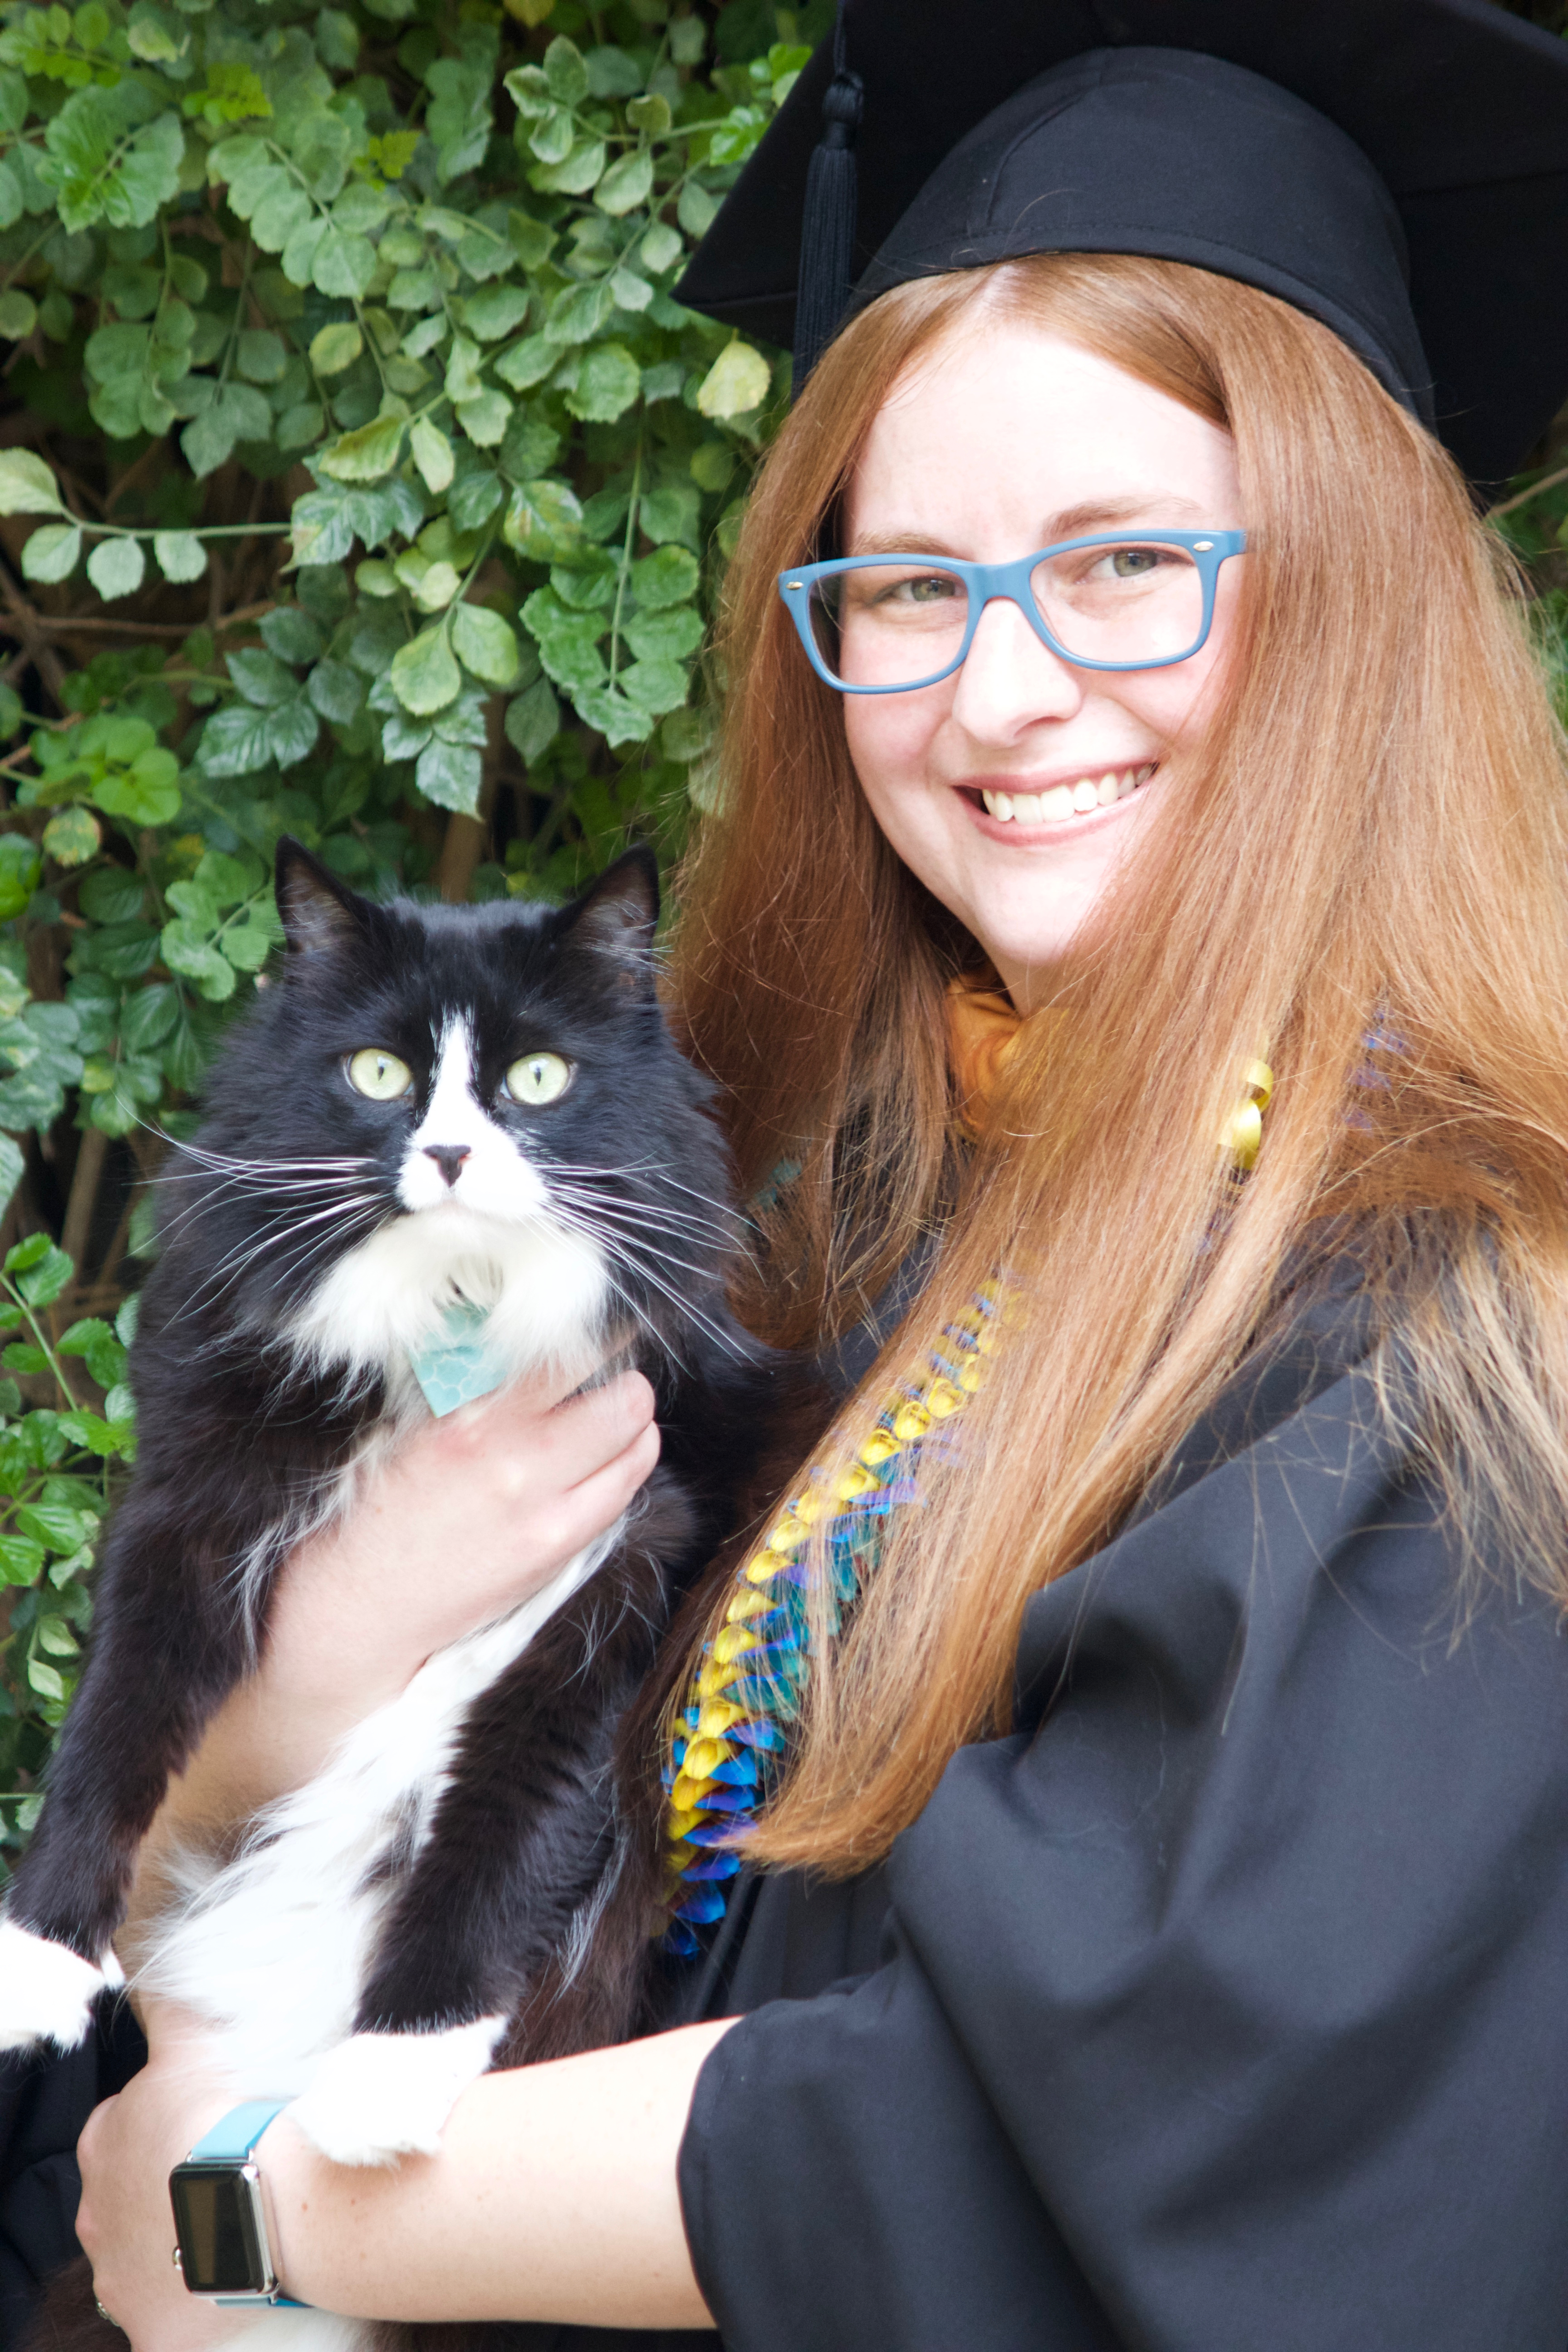 Emilie and her cat pose for a graduation photo